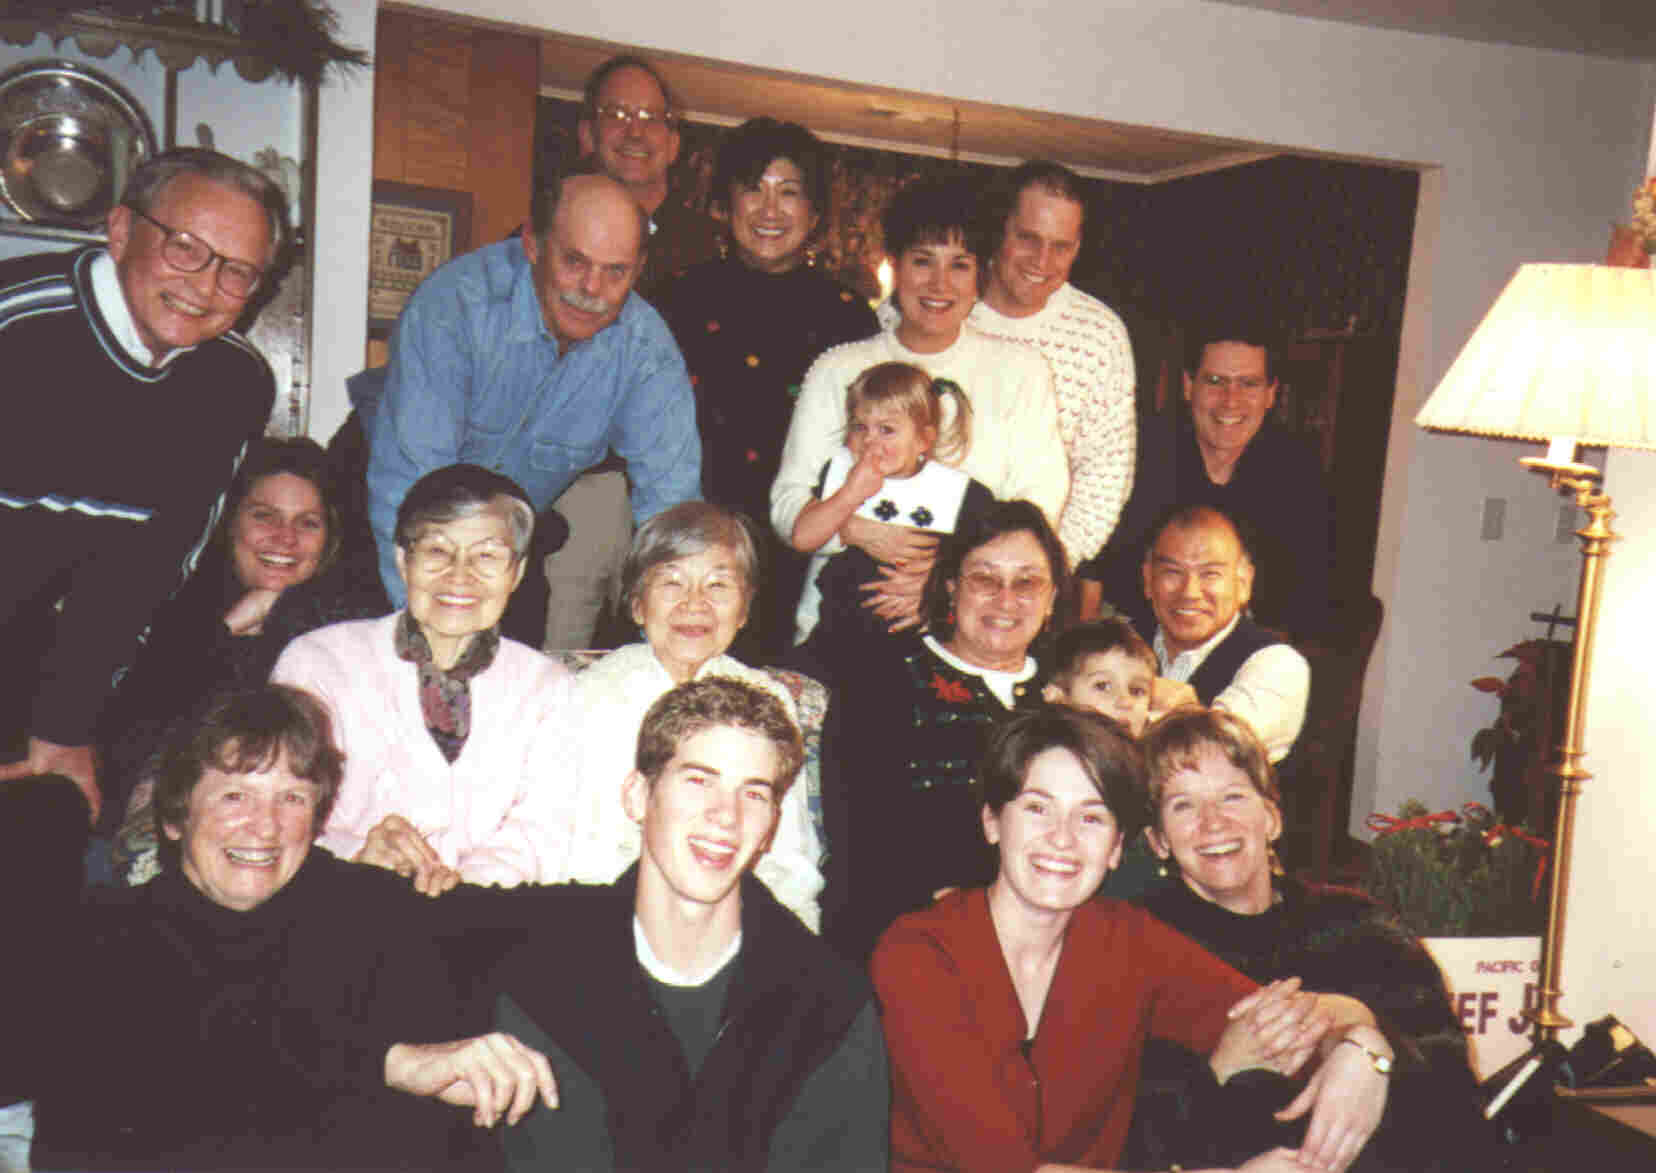 The group at Pam's House on Christmas Day